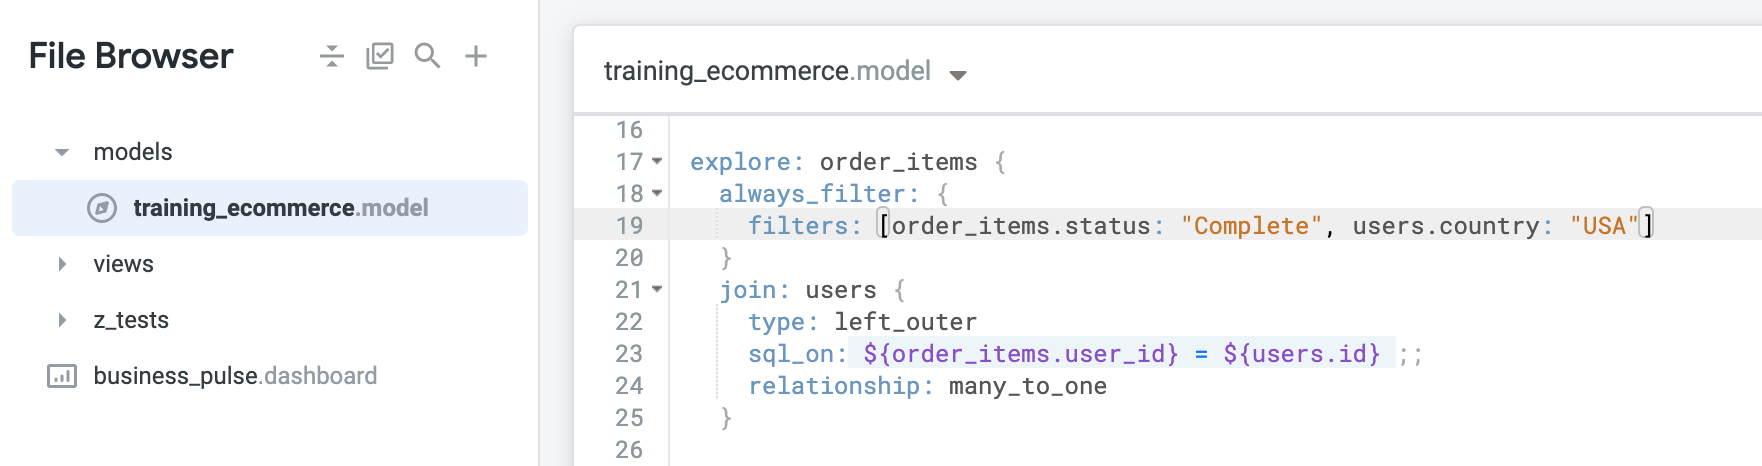 The training_ecommerce.model data, with the addition of the line: 'filters: [order_items.status:"complete", users.country: "USA"]'